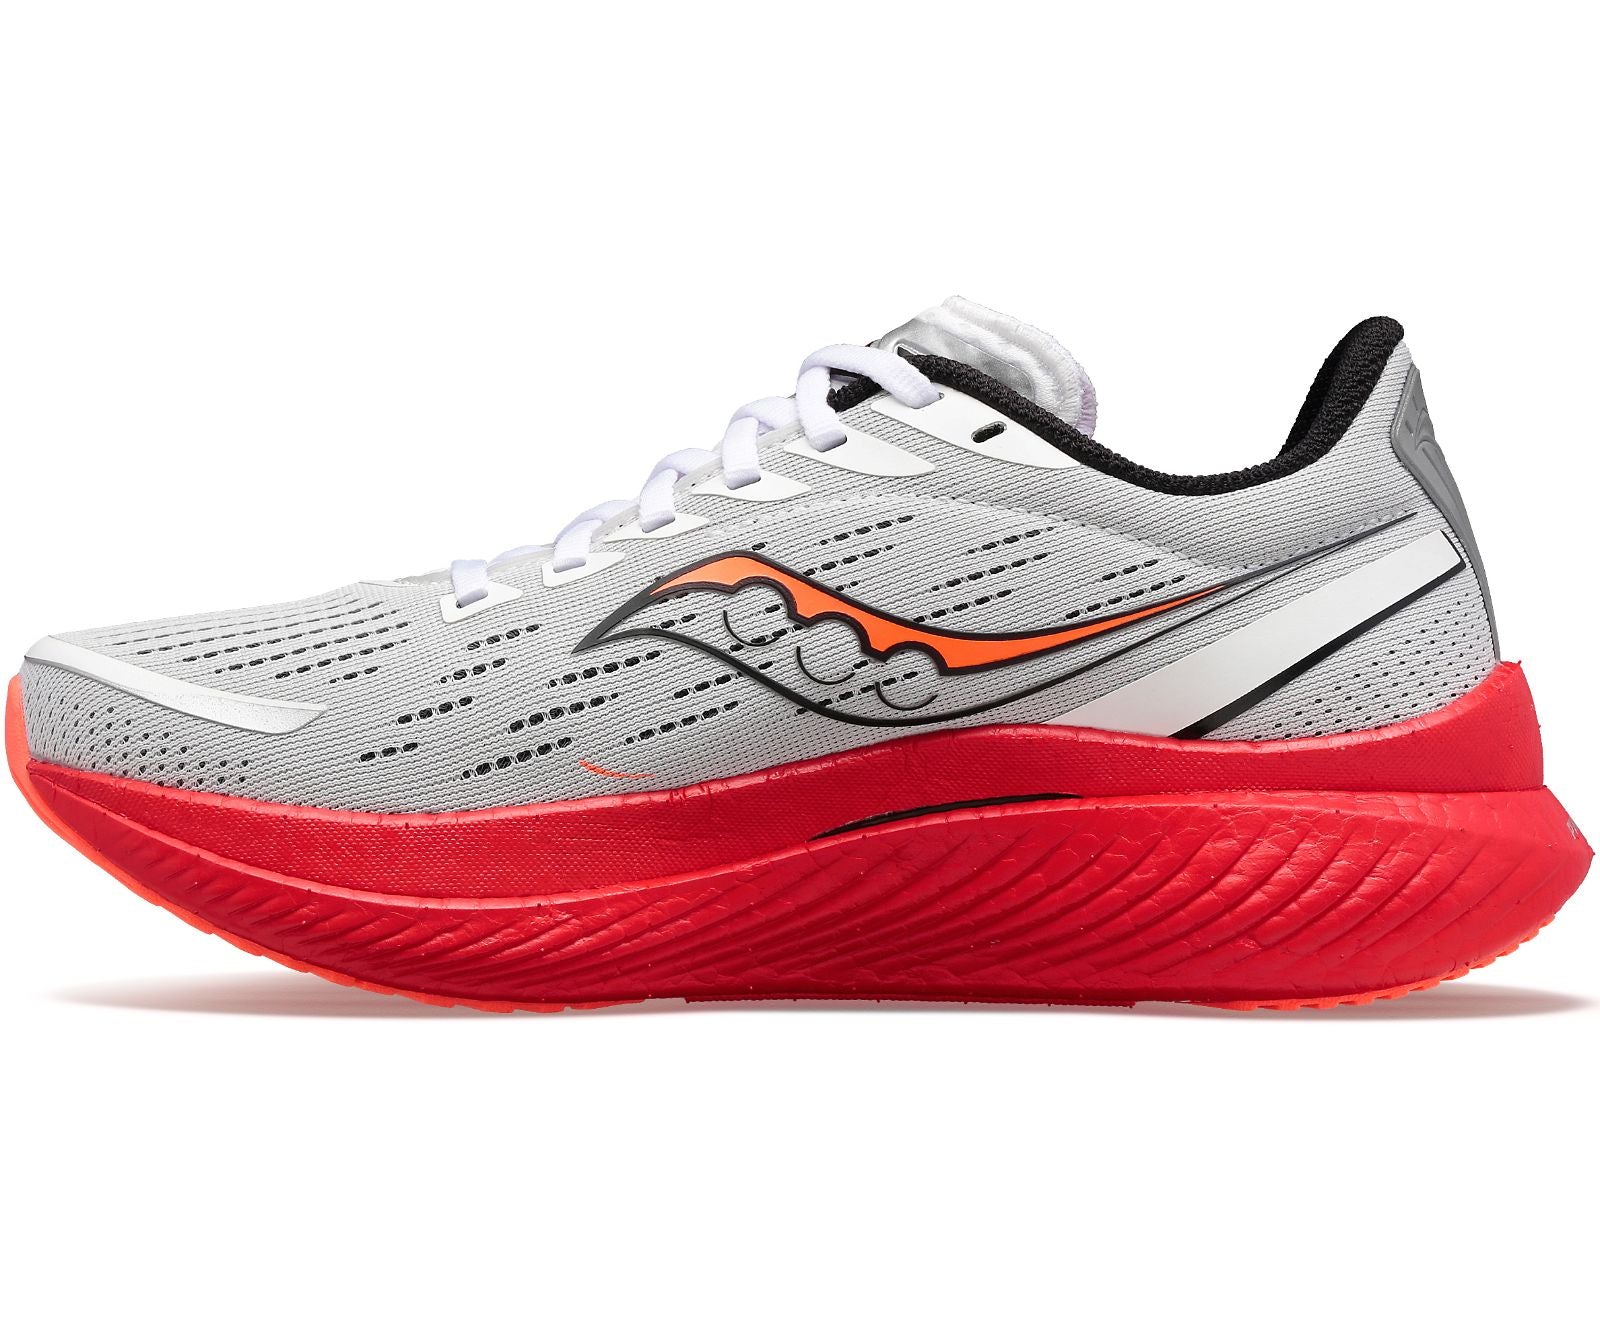 Medial view of the Women's Endorphin Speed 3 by Saucony in the color White/Black/ViziRed